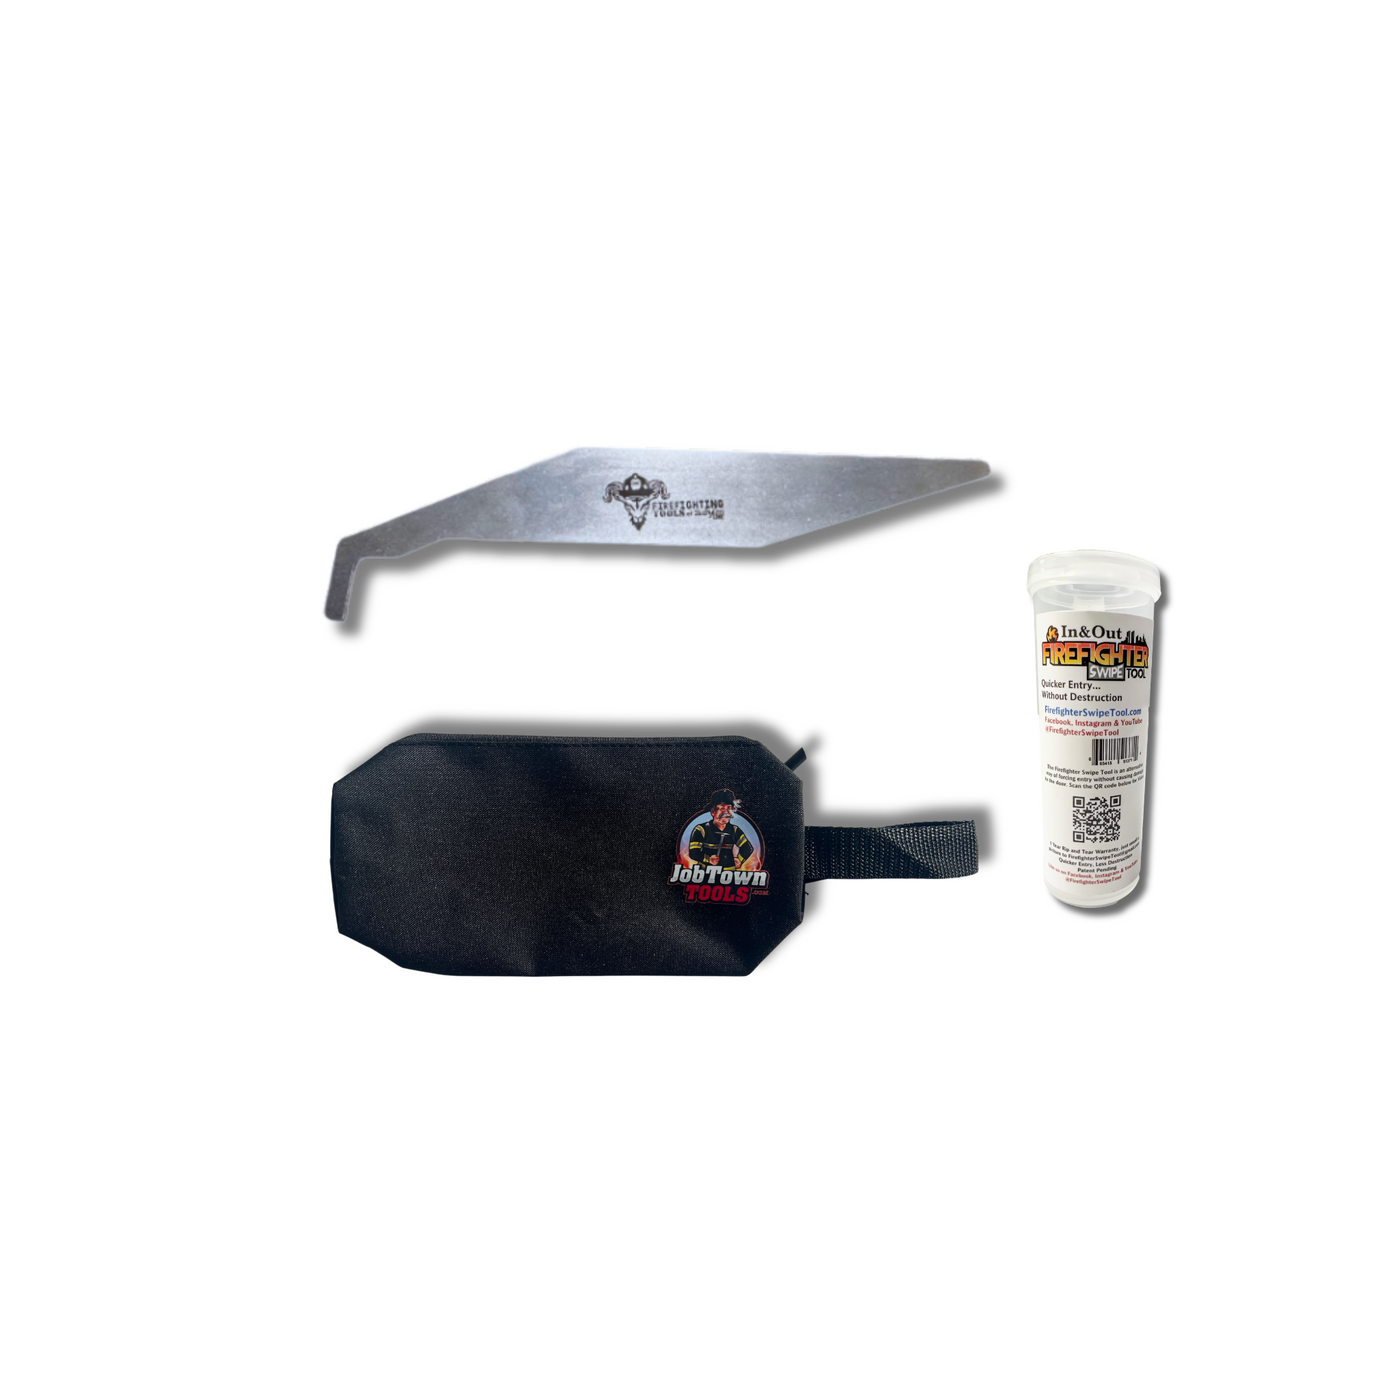 Firefighter Entry Quick Kit